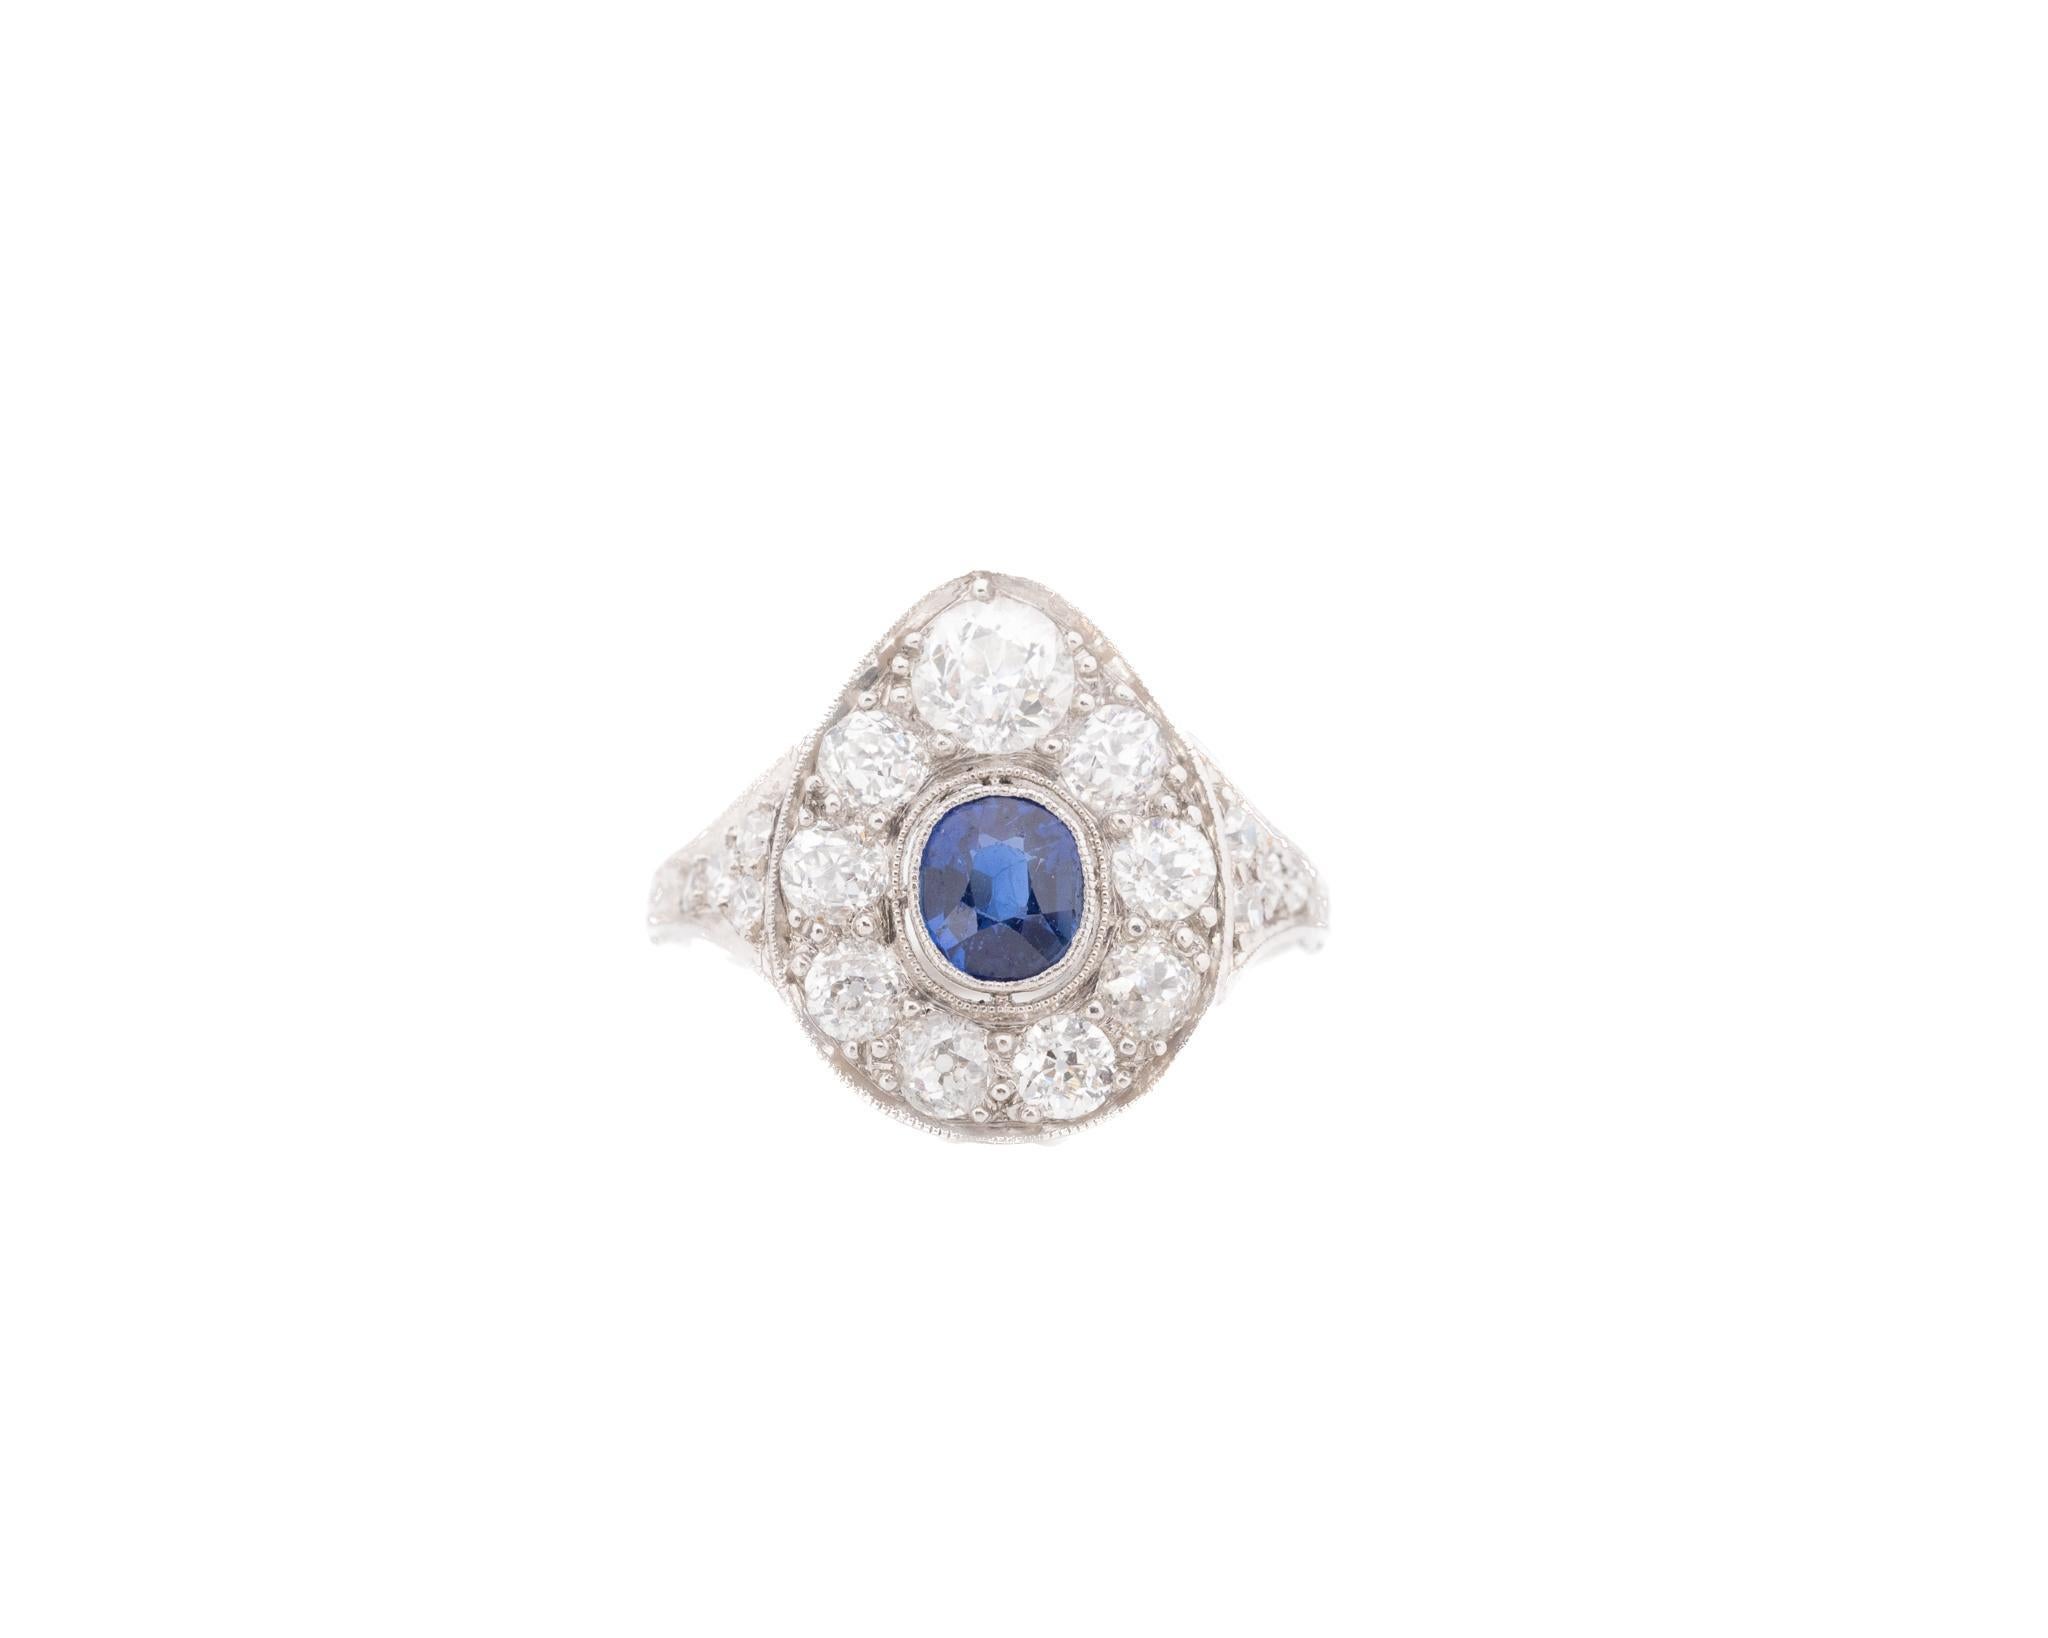 Year: 1926 (Engraved on shank)

Item Details:
Ring Size: 5.25
Metal Type: Platinum [Hallmarked, and Tested]
Weight: 3.7 grams

Center Stone Details:

GIA Report#:2235156476
Weight: .60ct total weight
Cut: Old European brilliant
Color: Blue
Type: